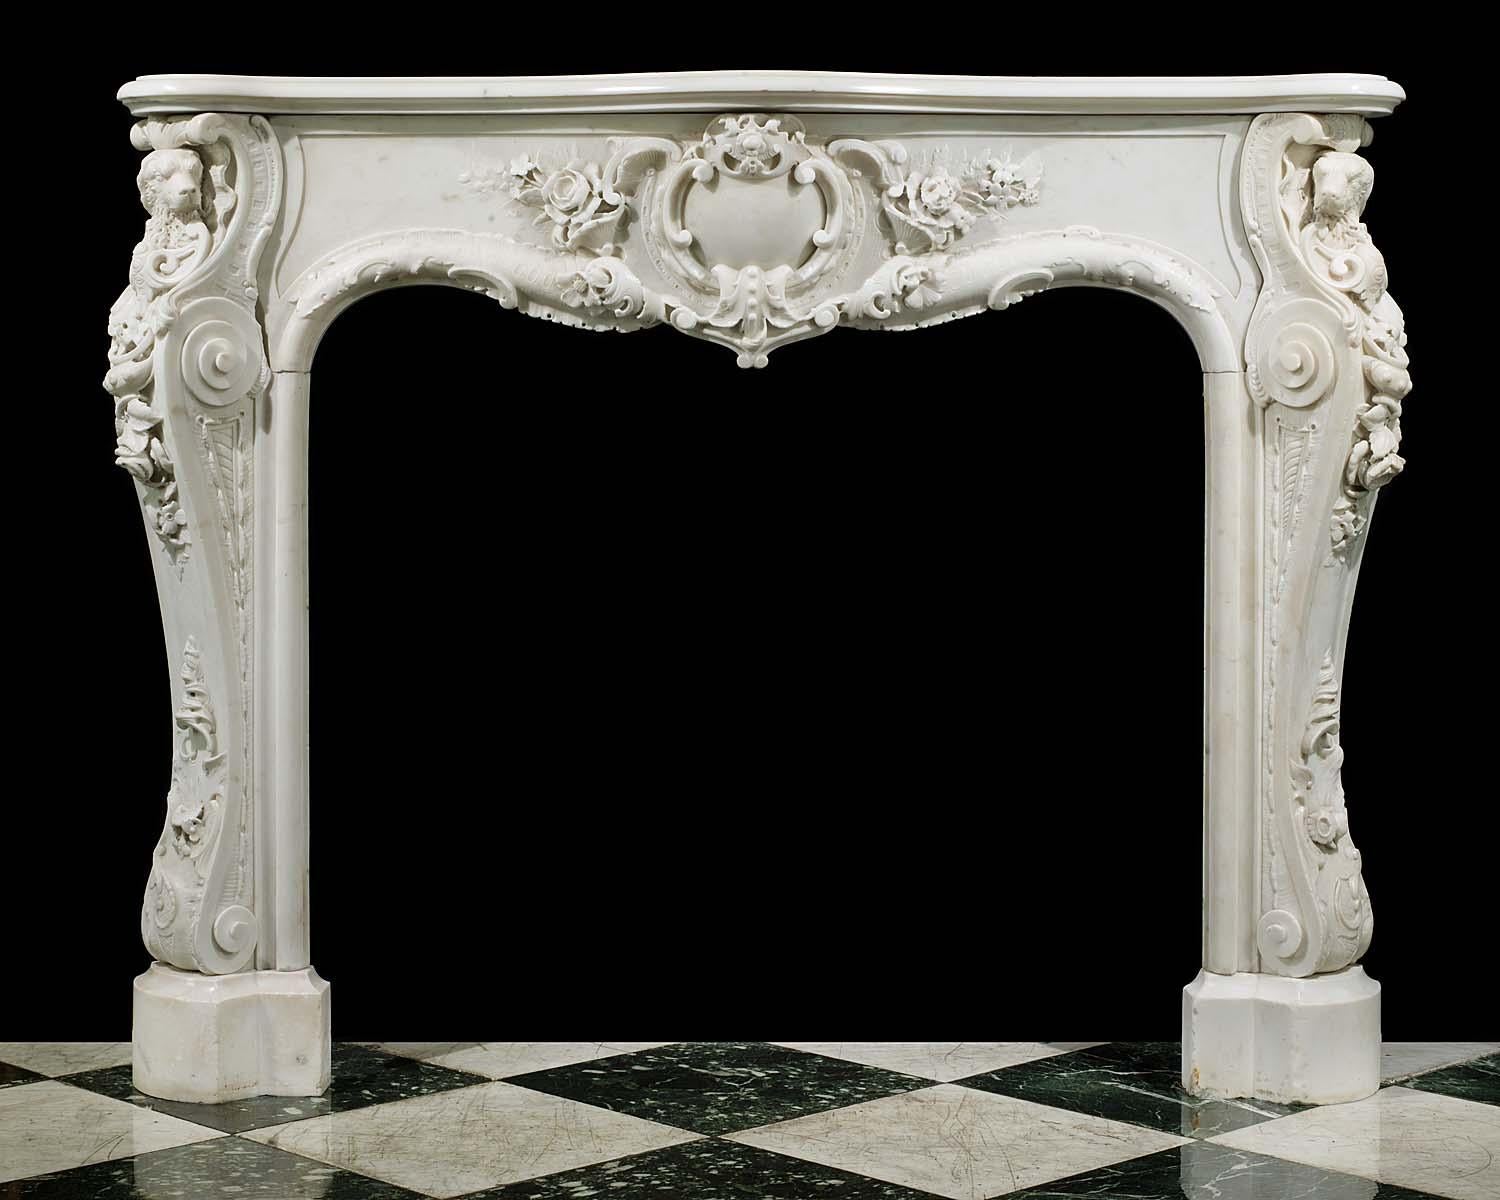 Irish water spaniels
A rare and remarkable English Rococo Statuary Marble antique chimneypiece with richly and intricately carved floral and rocaille decoration. The boldly conceived and executed central cartouche bordered by both subtle and high